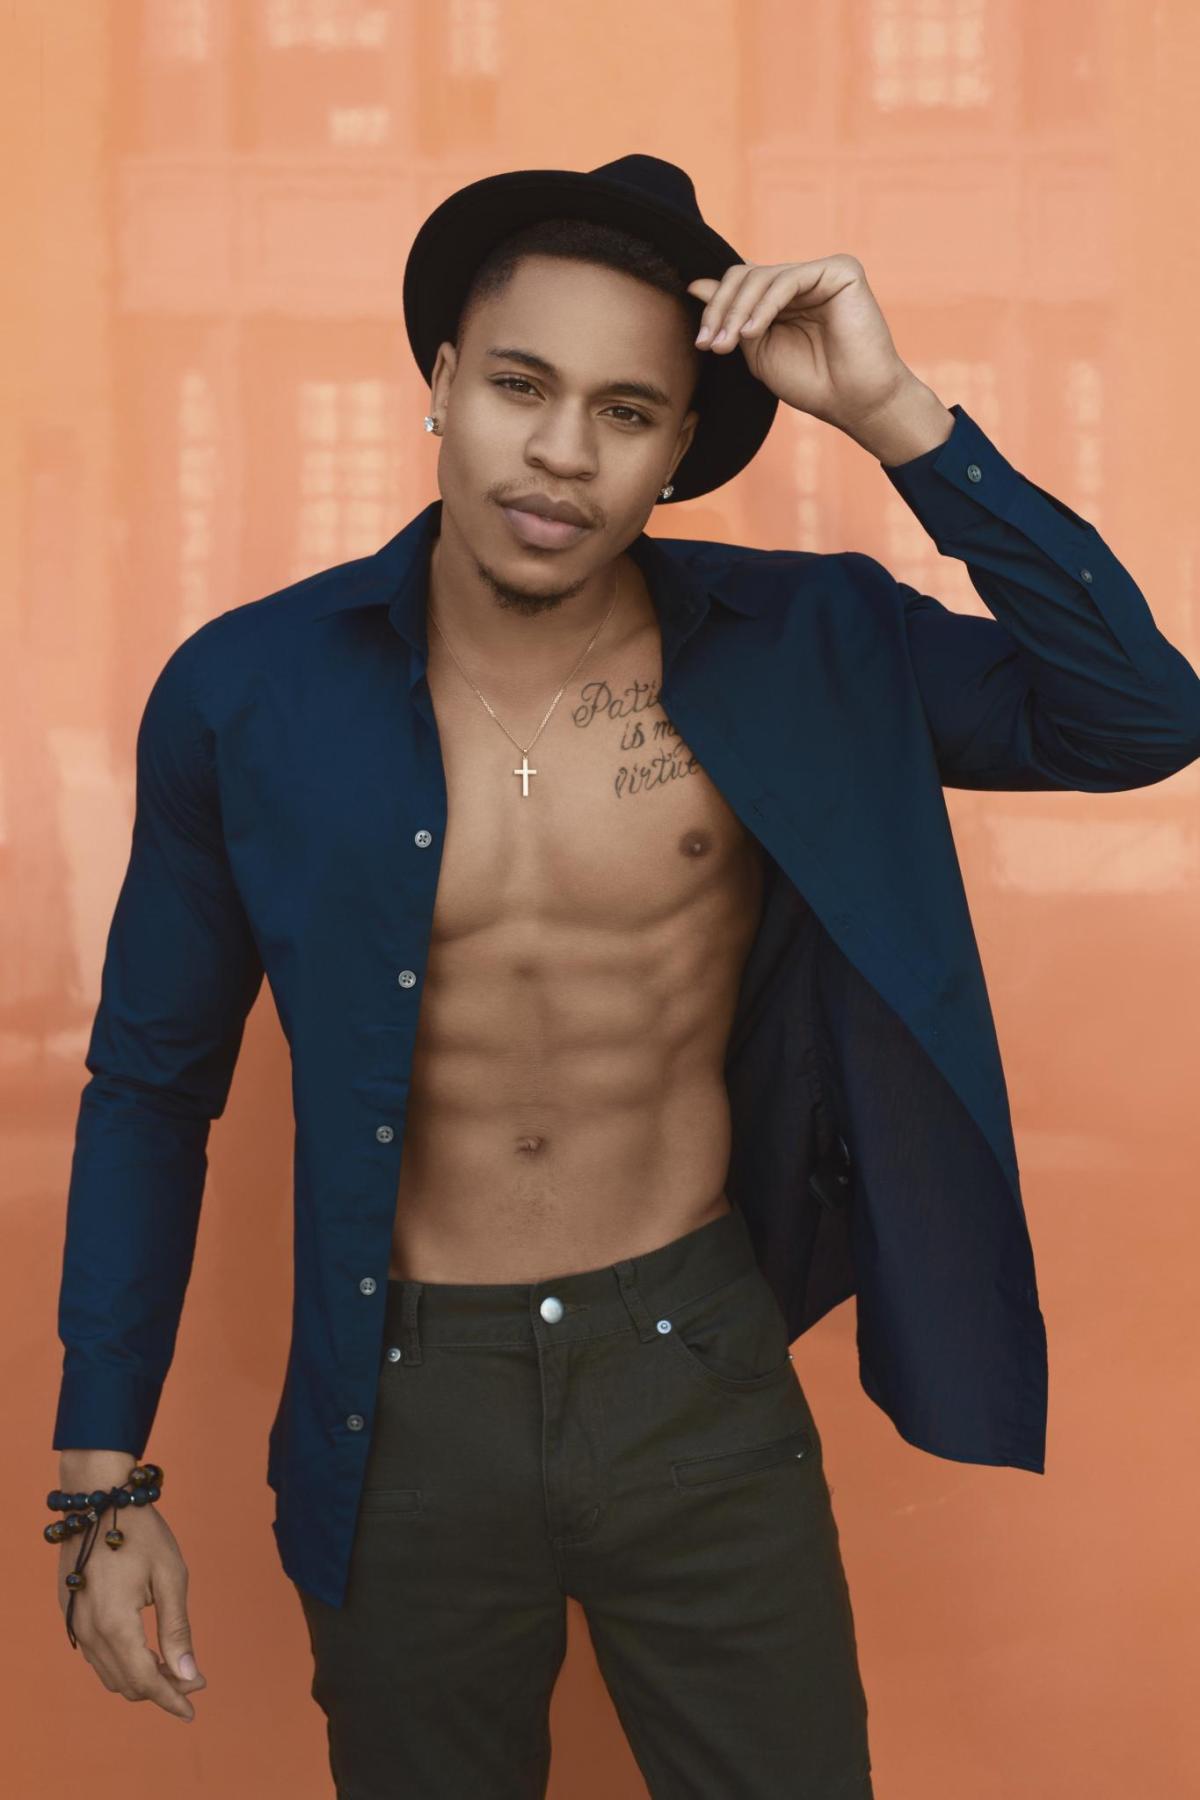 [VIDEO] In Eggplant News: Power’s Rotimi Alleged Nude Photos & Sex Tape Leaked!